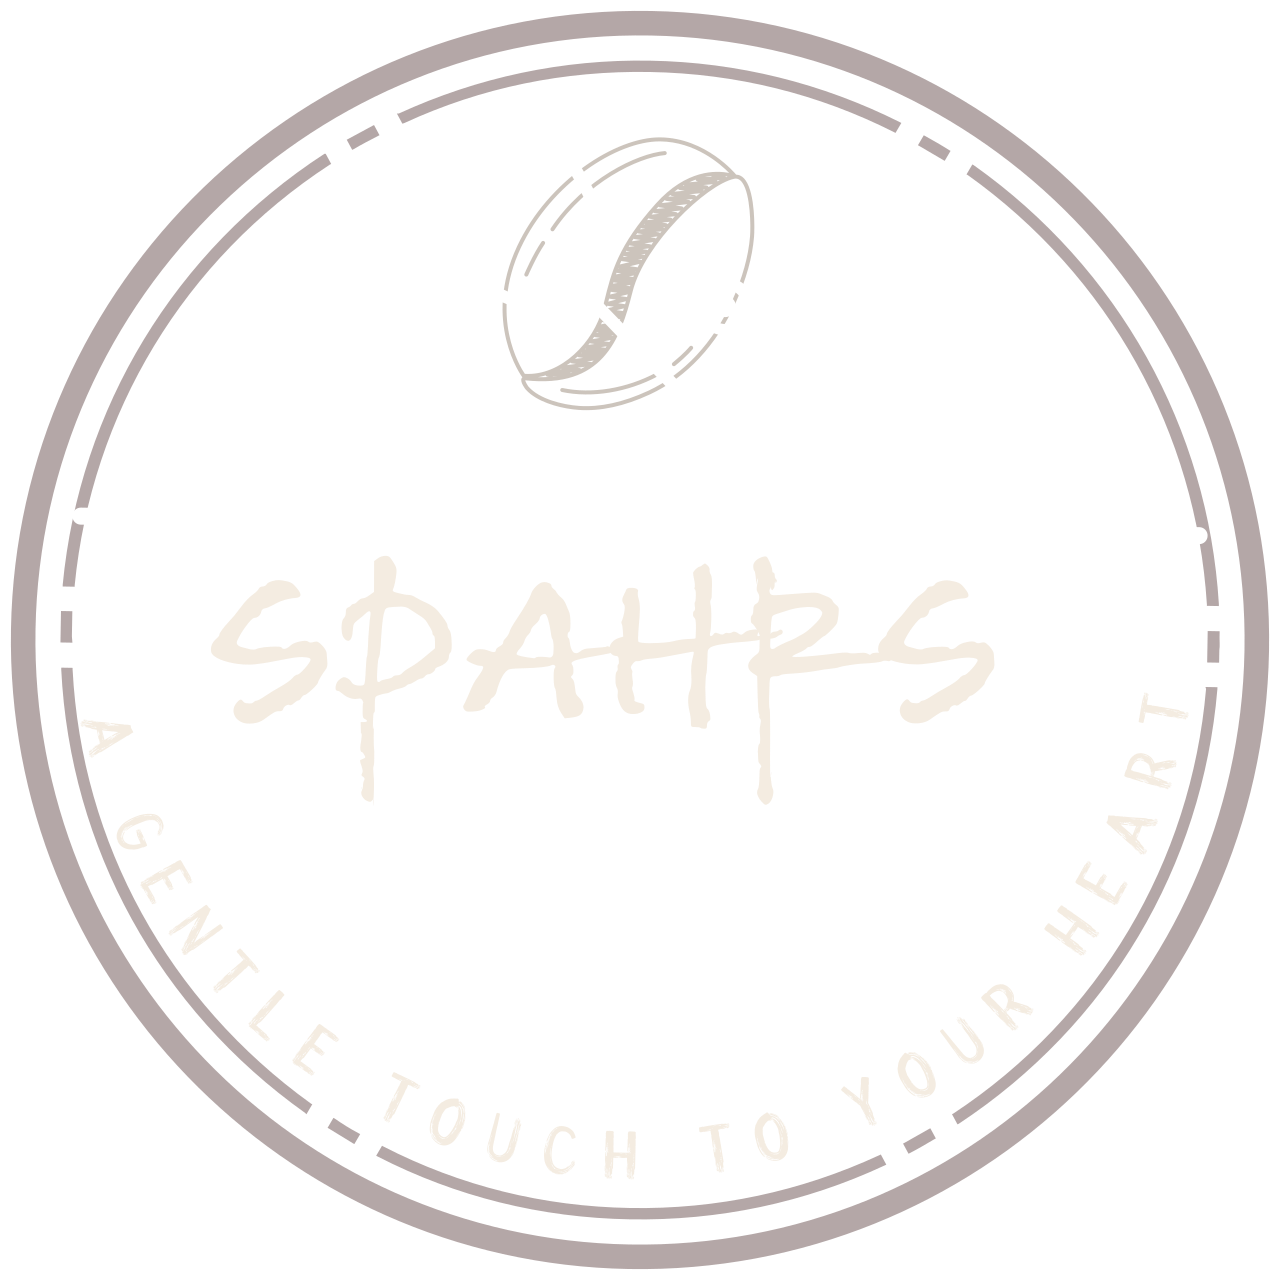 SPAHRS's web page